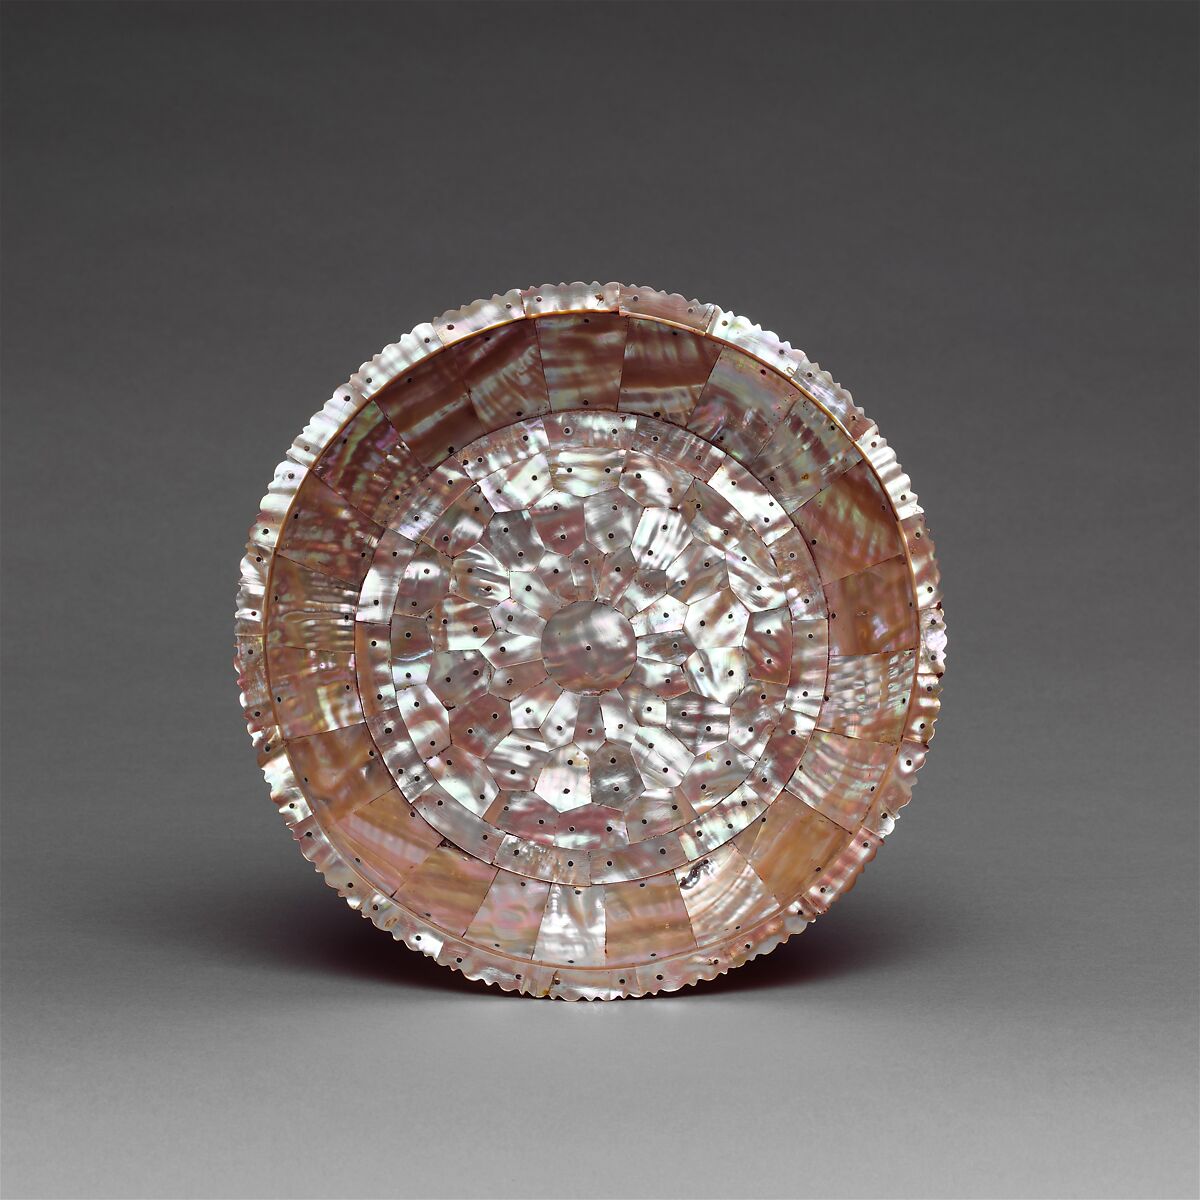 Plate, Mother-of-pearl with copper alloy base (underside) and rim frame, India (Gujarat) 